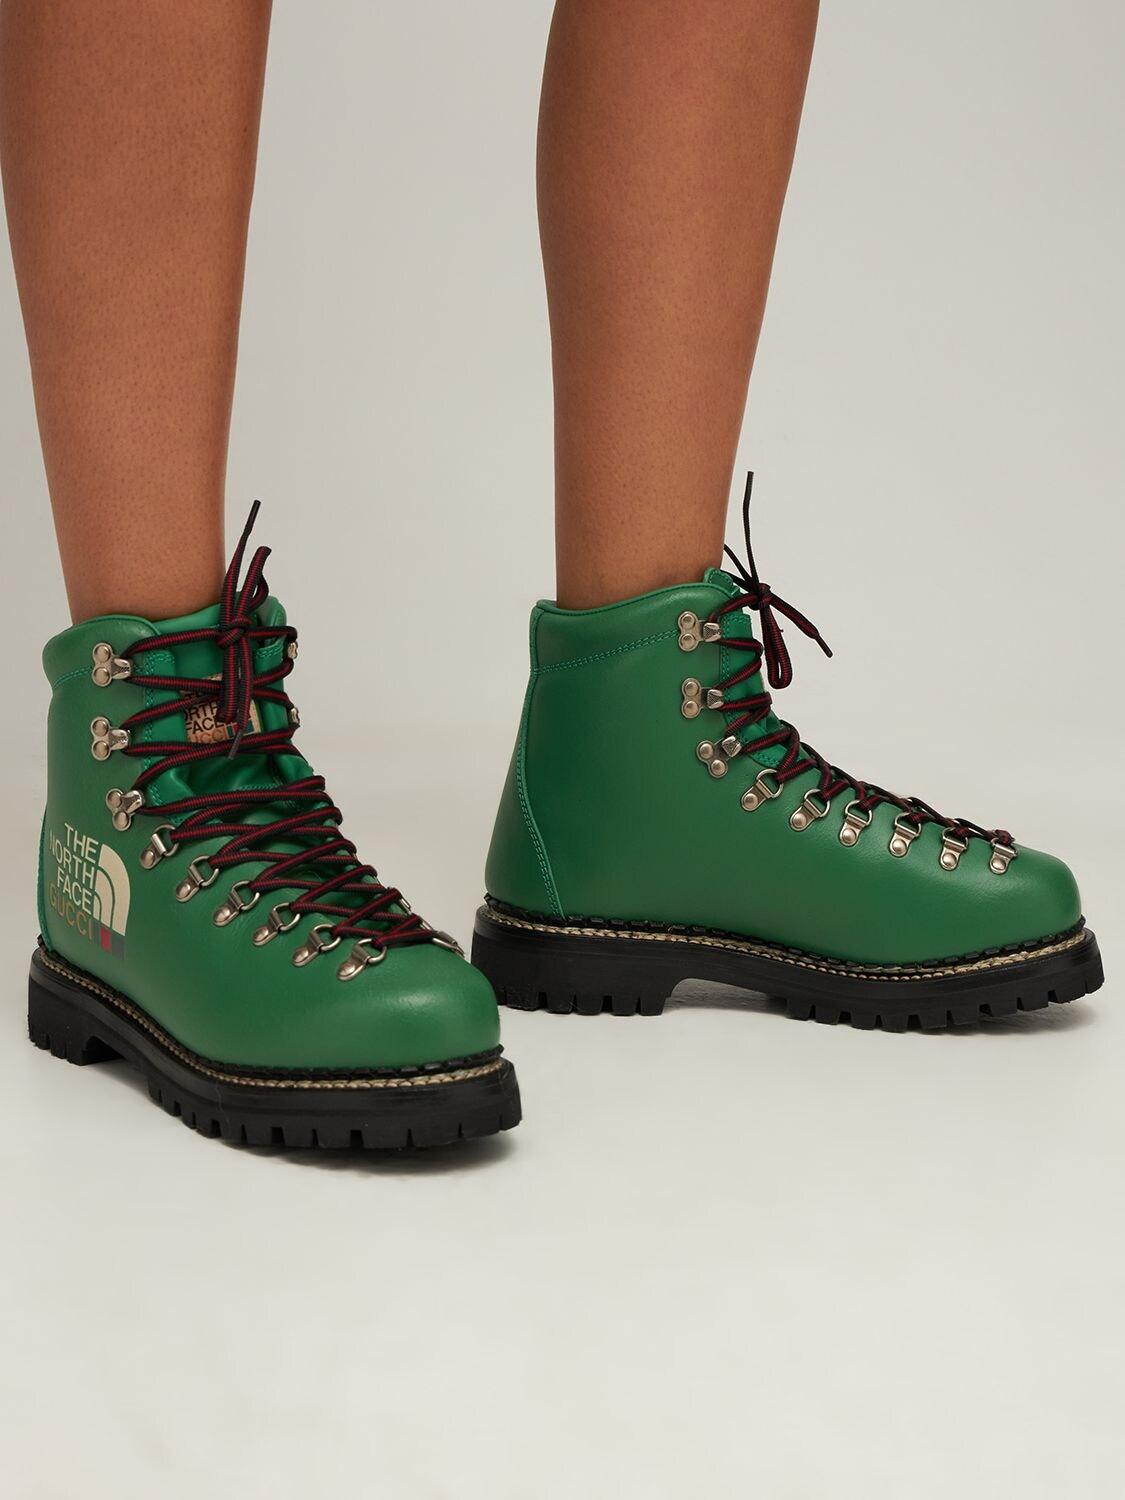 Gucci X The North Face Leather Hiking Boots in Green | Lyst